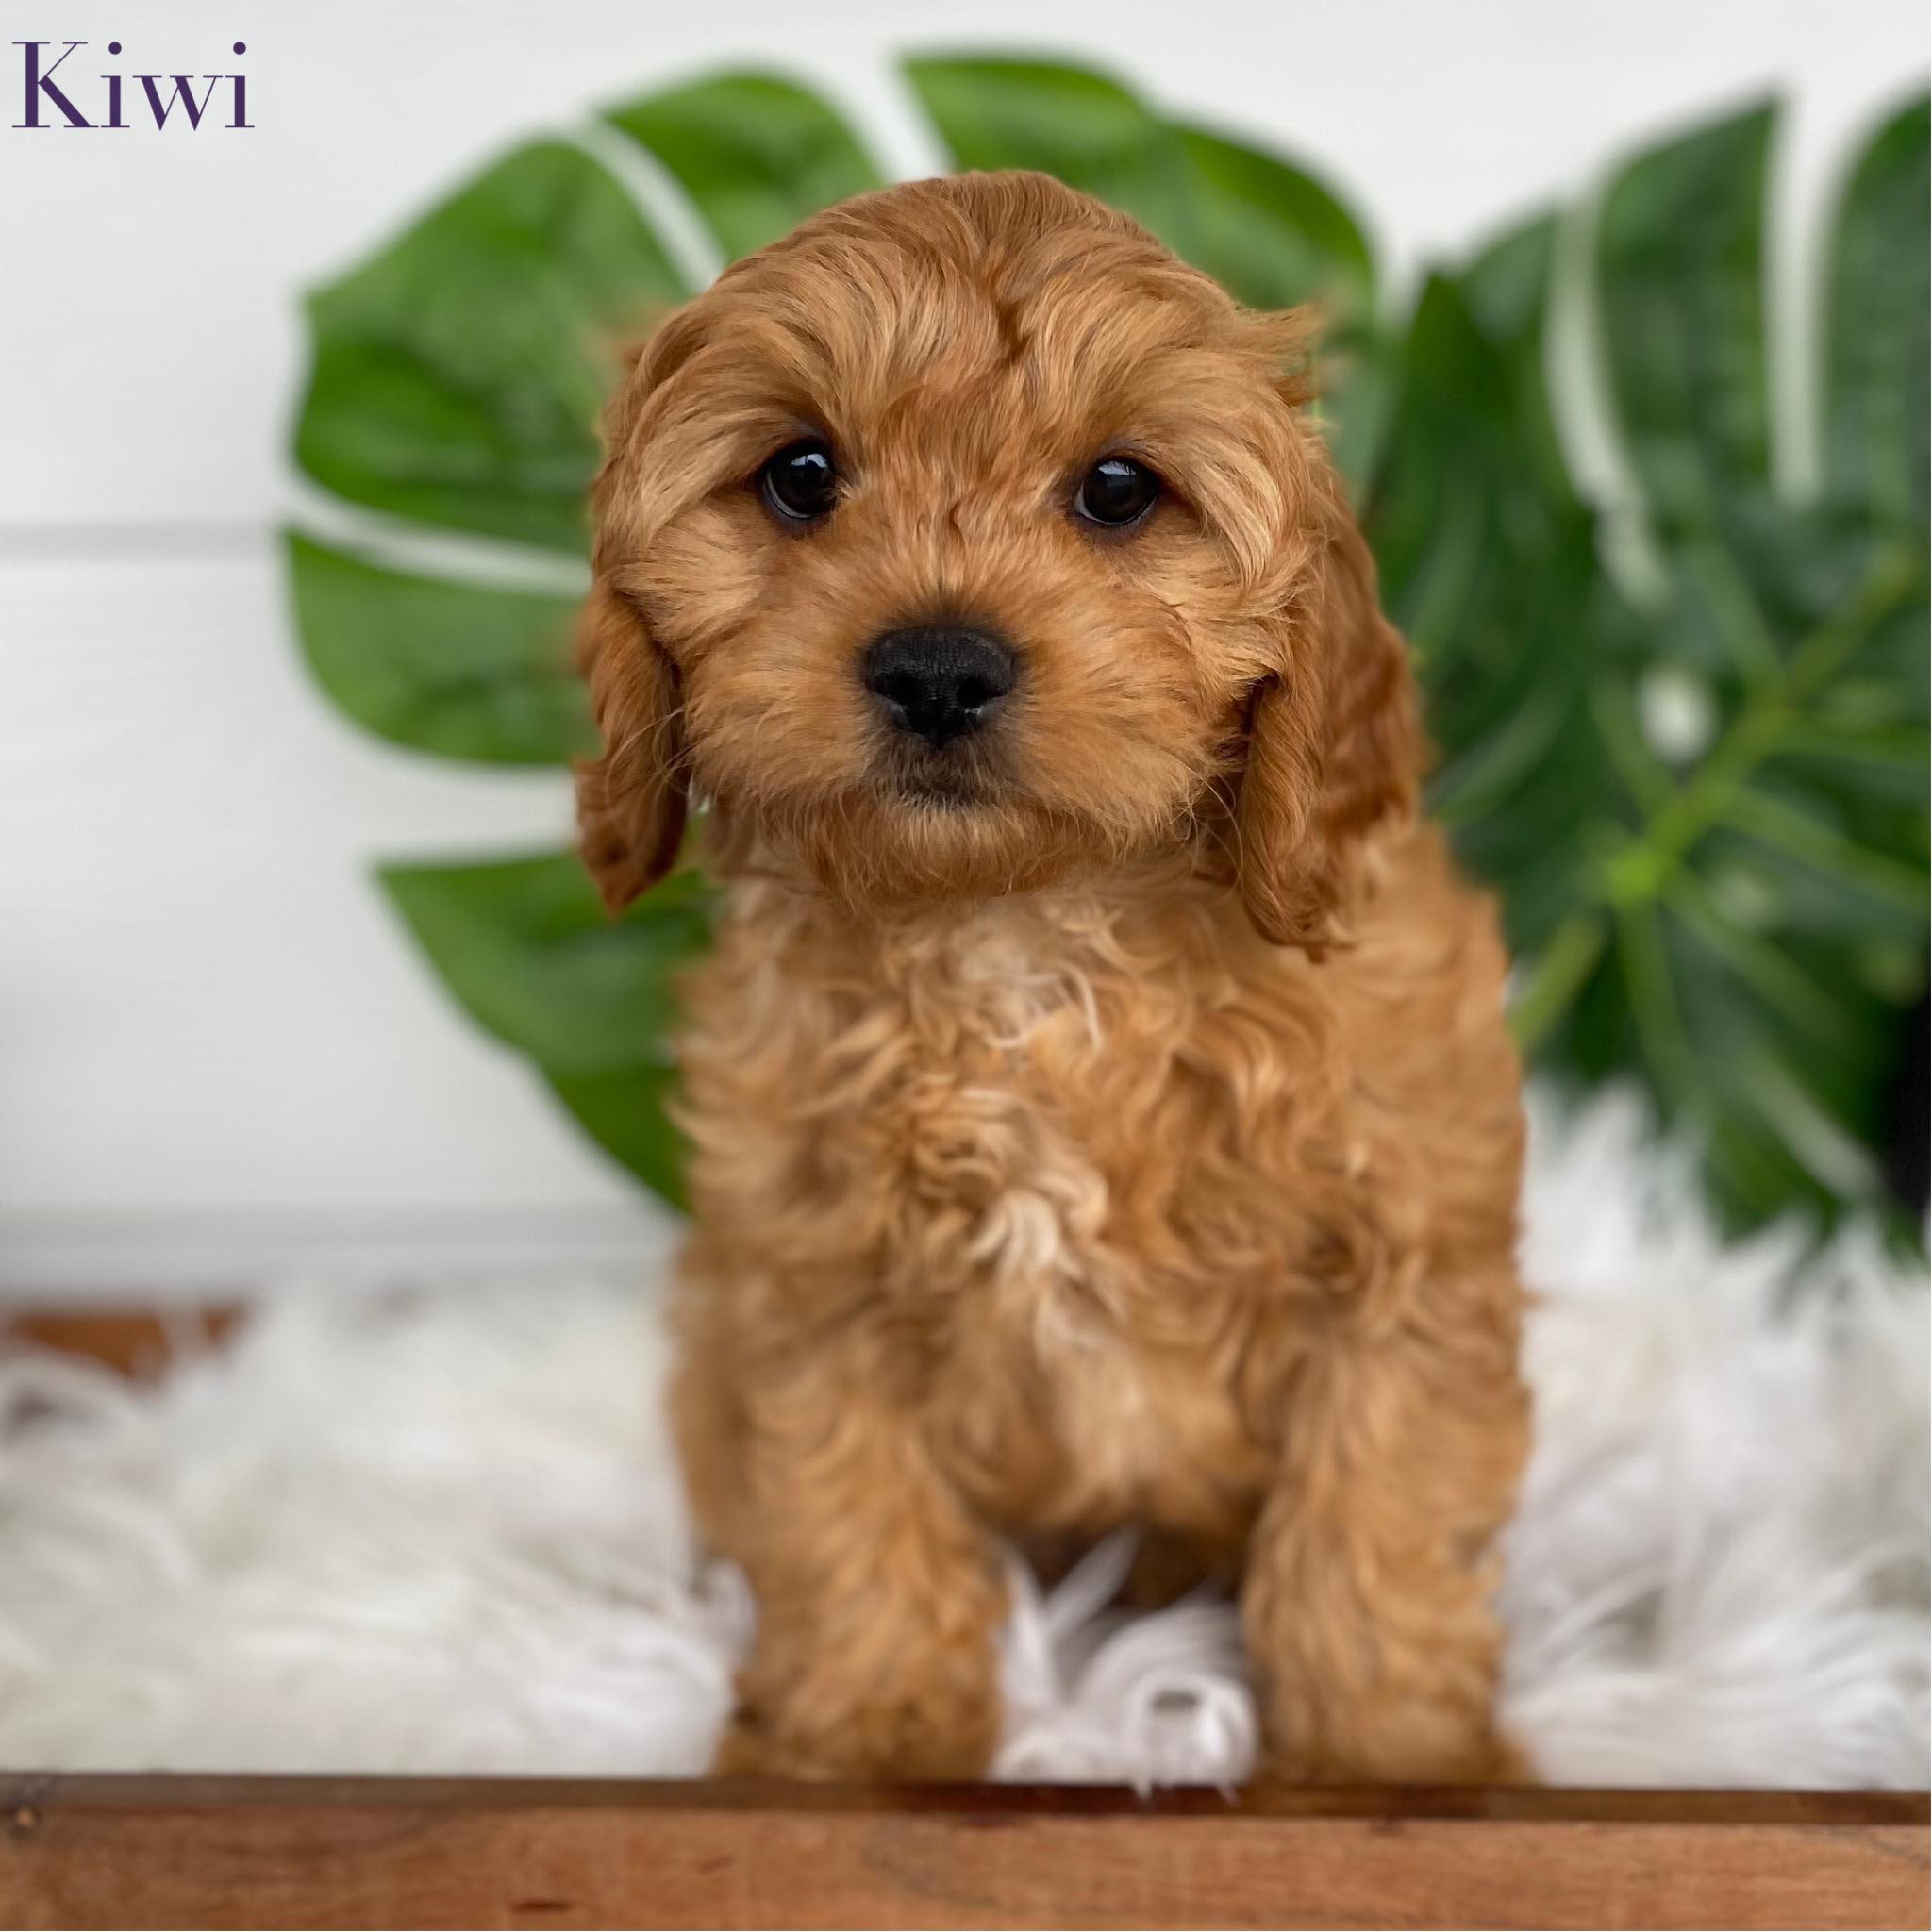 .Toy Cavoodle Male Kiwi - Available Now to Adopt